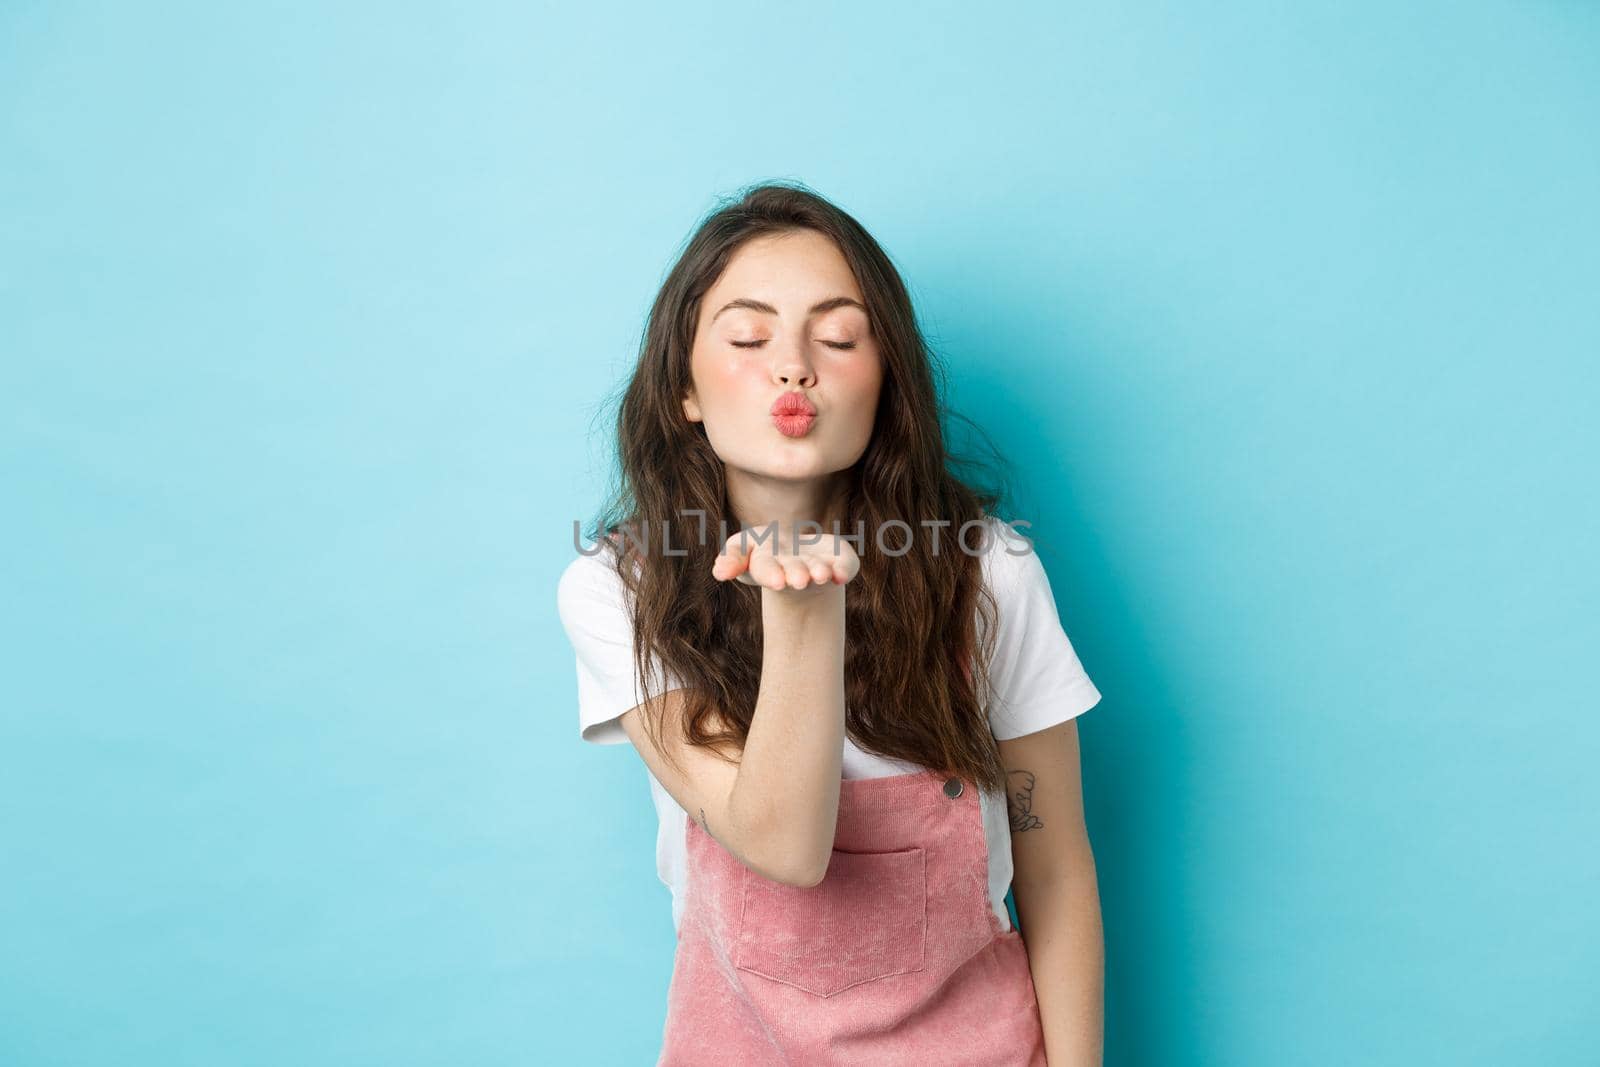 Portrait of lovely, beautiful brunette woman sending air kiss at camera, blowing mwah with palm near puckered lips and closed eyes, standing over blue background.